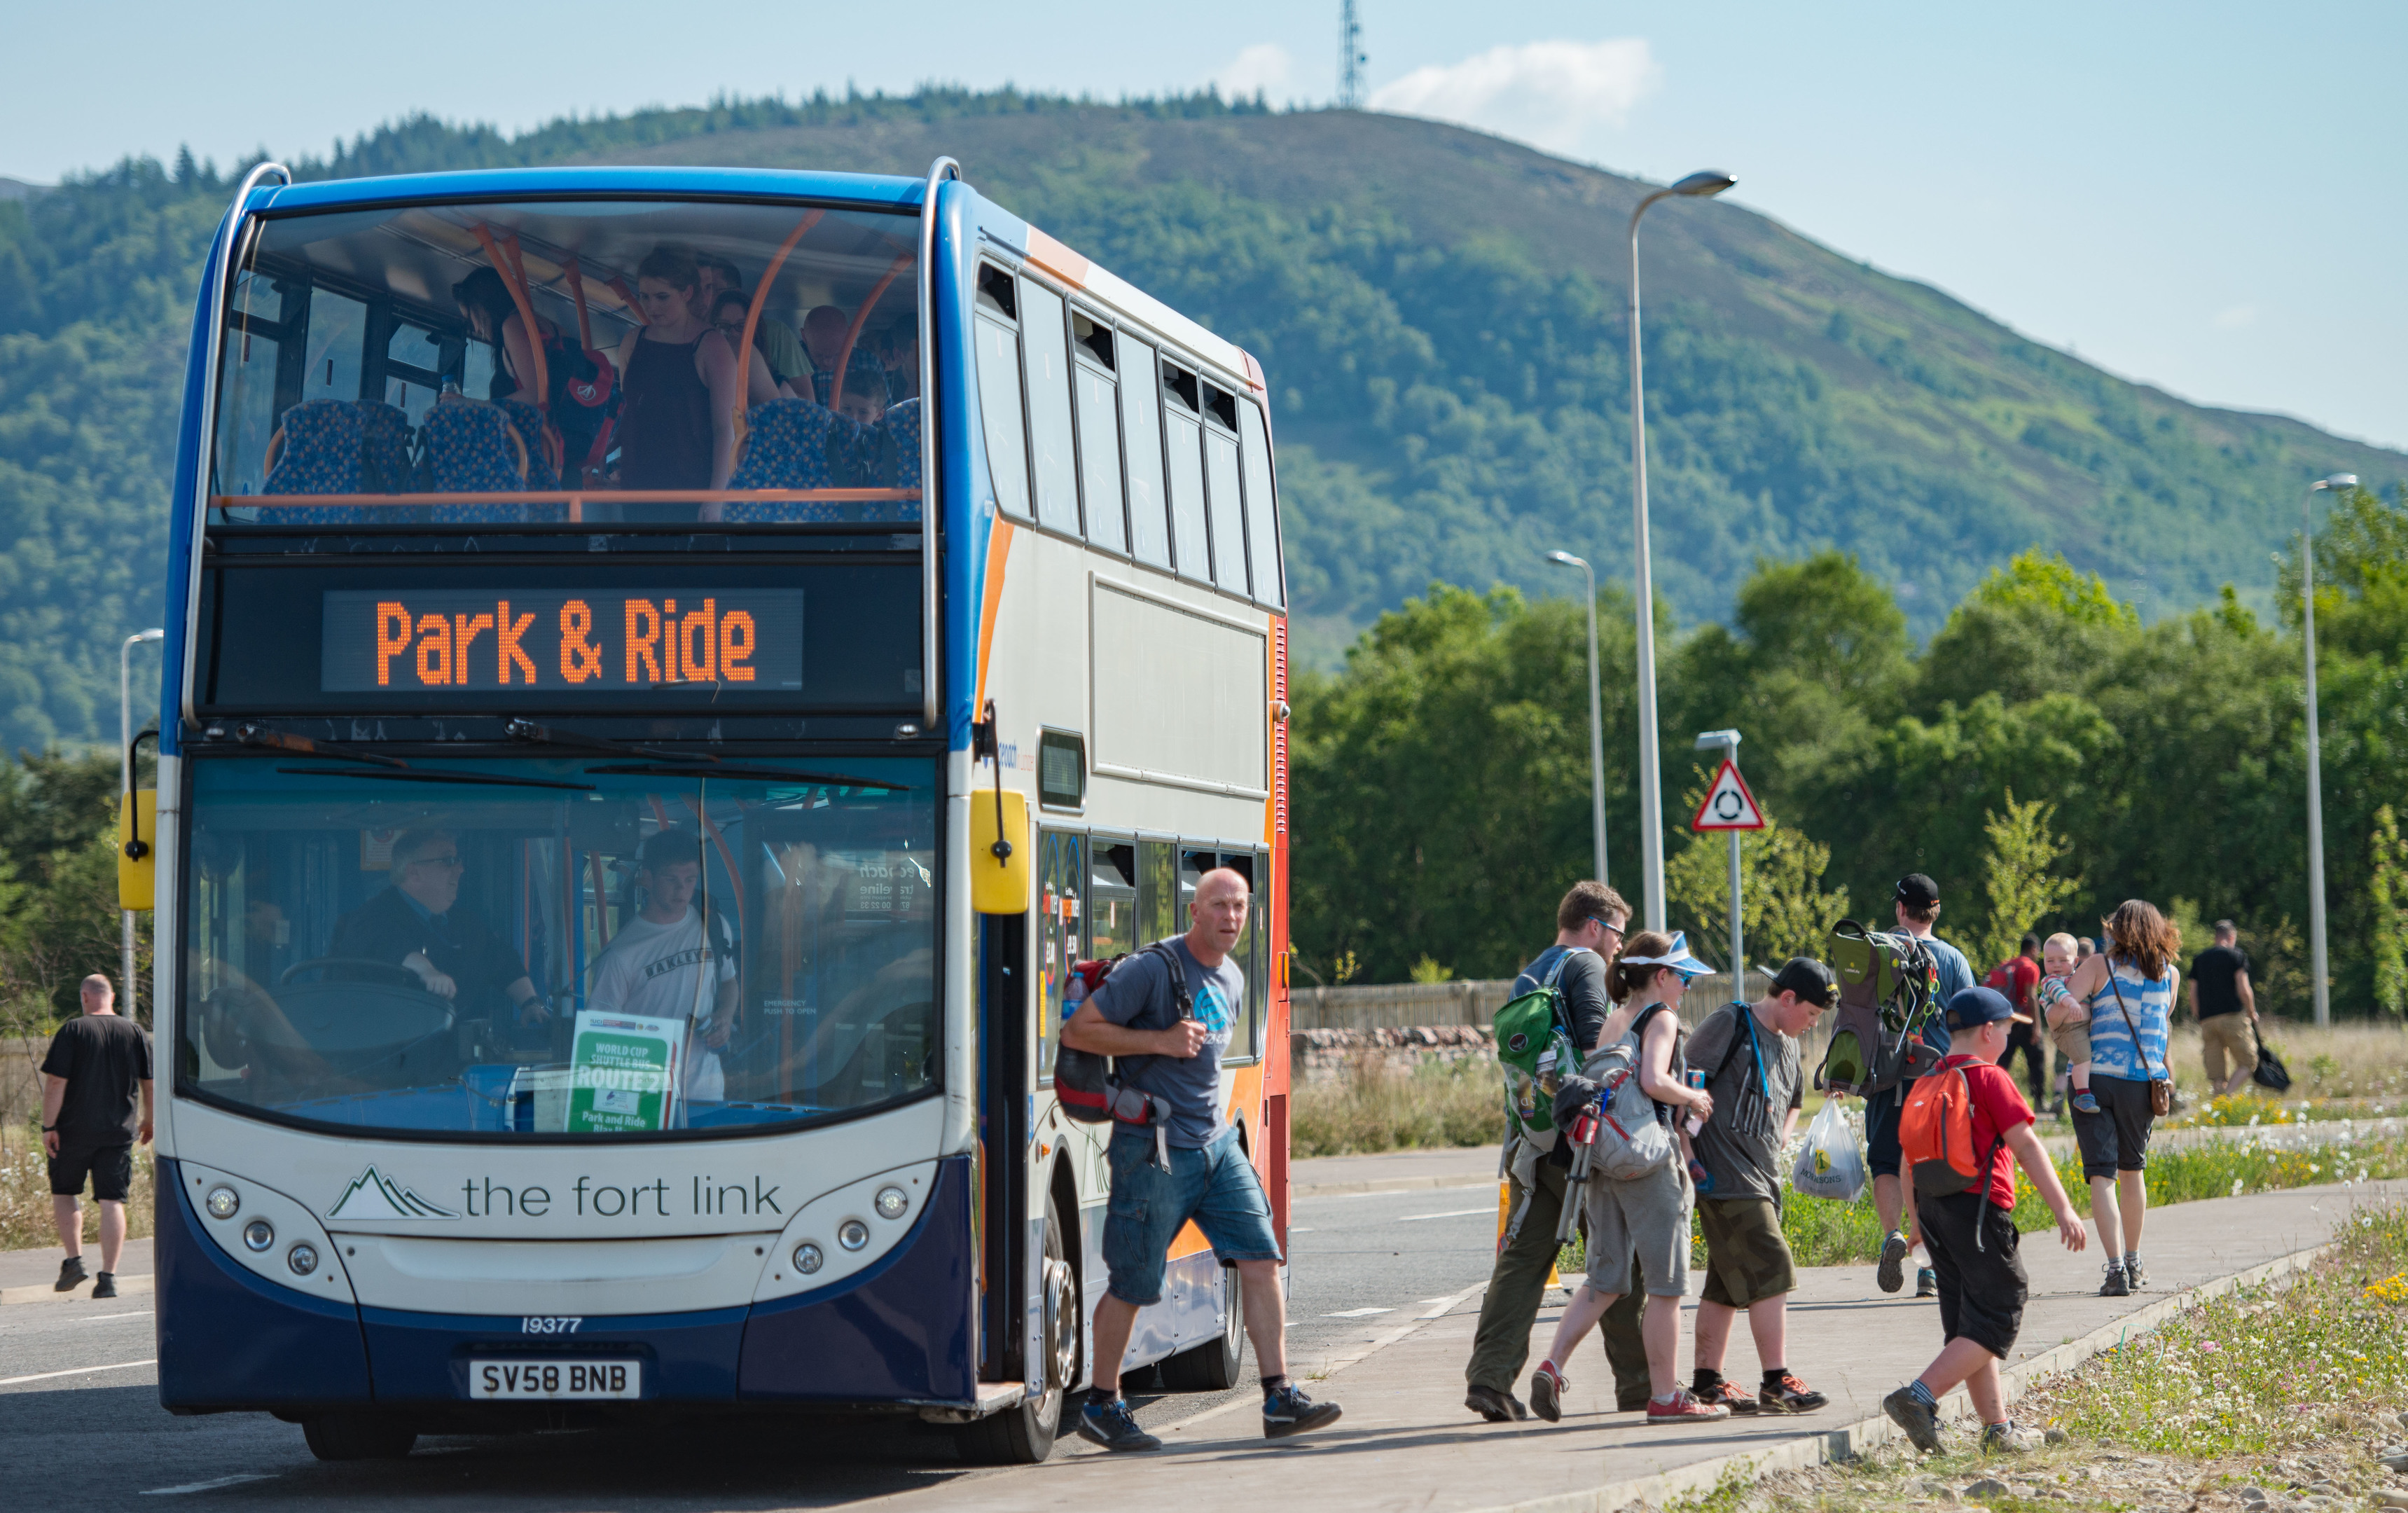 One of the many buses that ferried people between the park and ride car park on Blar Mhor and Nevis Range for the UCI Mountain Bike World Cup